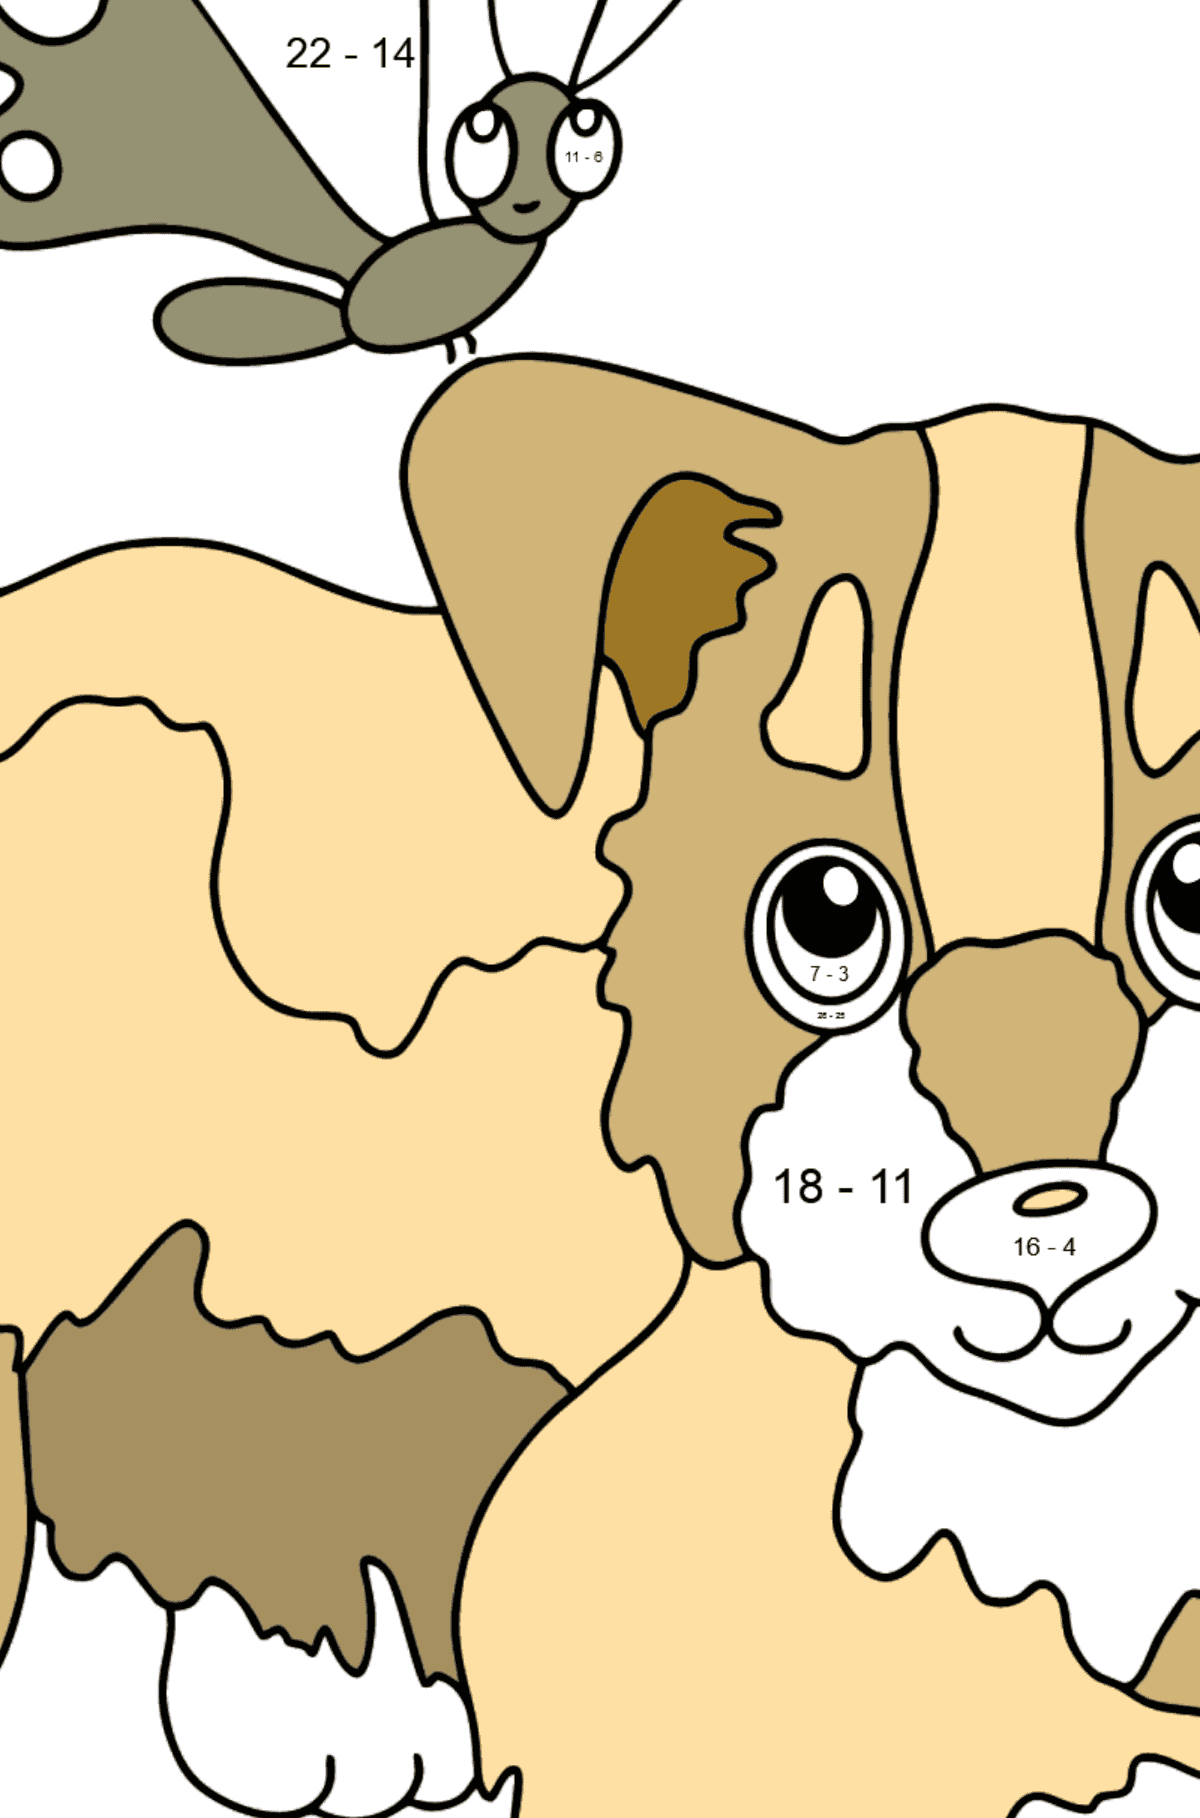 Coloring Page - A Dog is Playing with a Beautiful Butterfly - Math Coloring - Subtraction for Kids